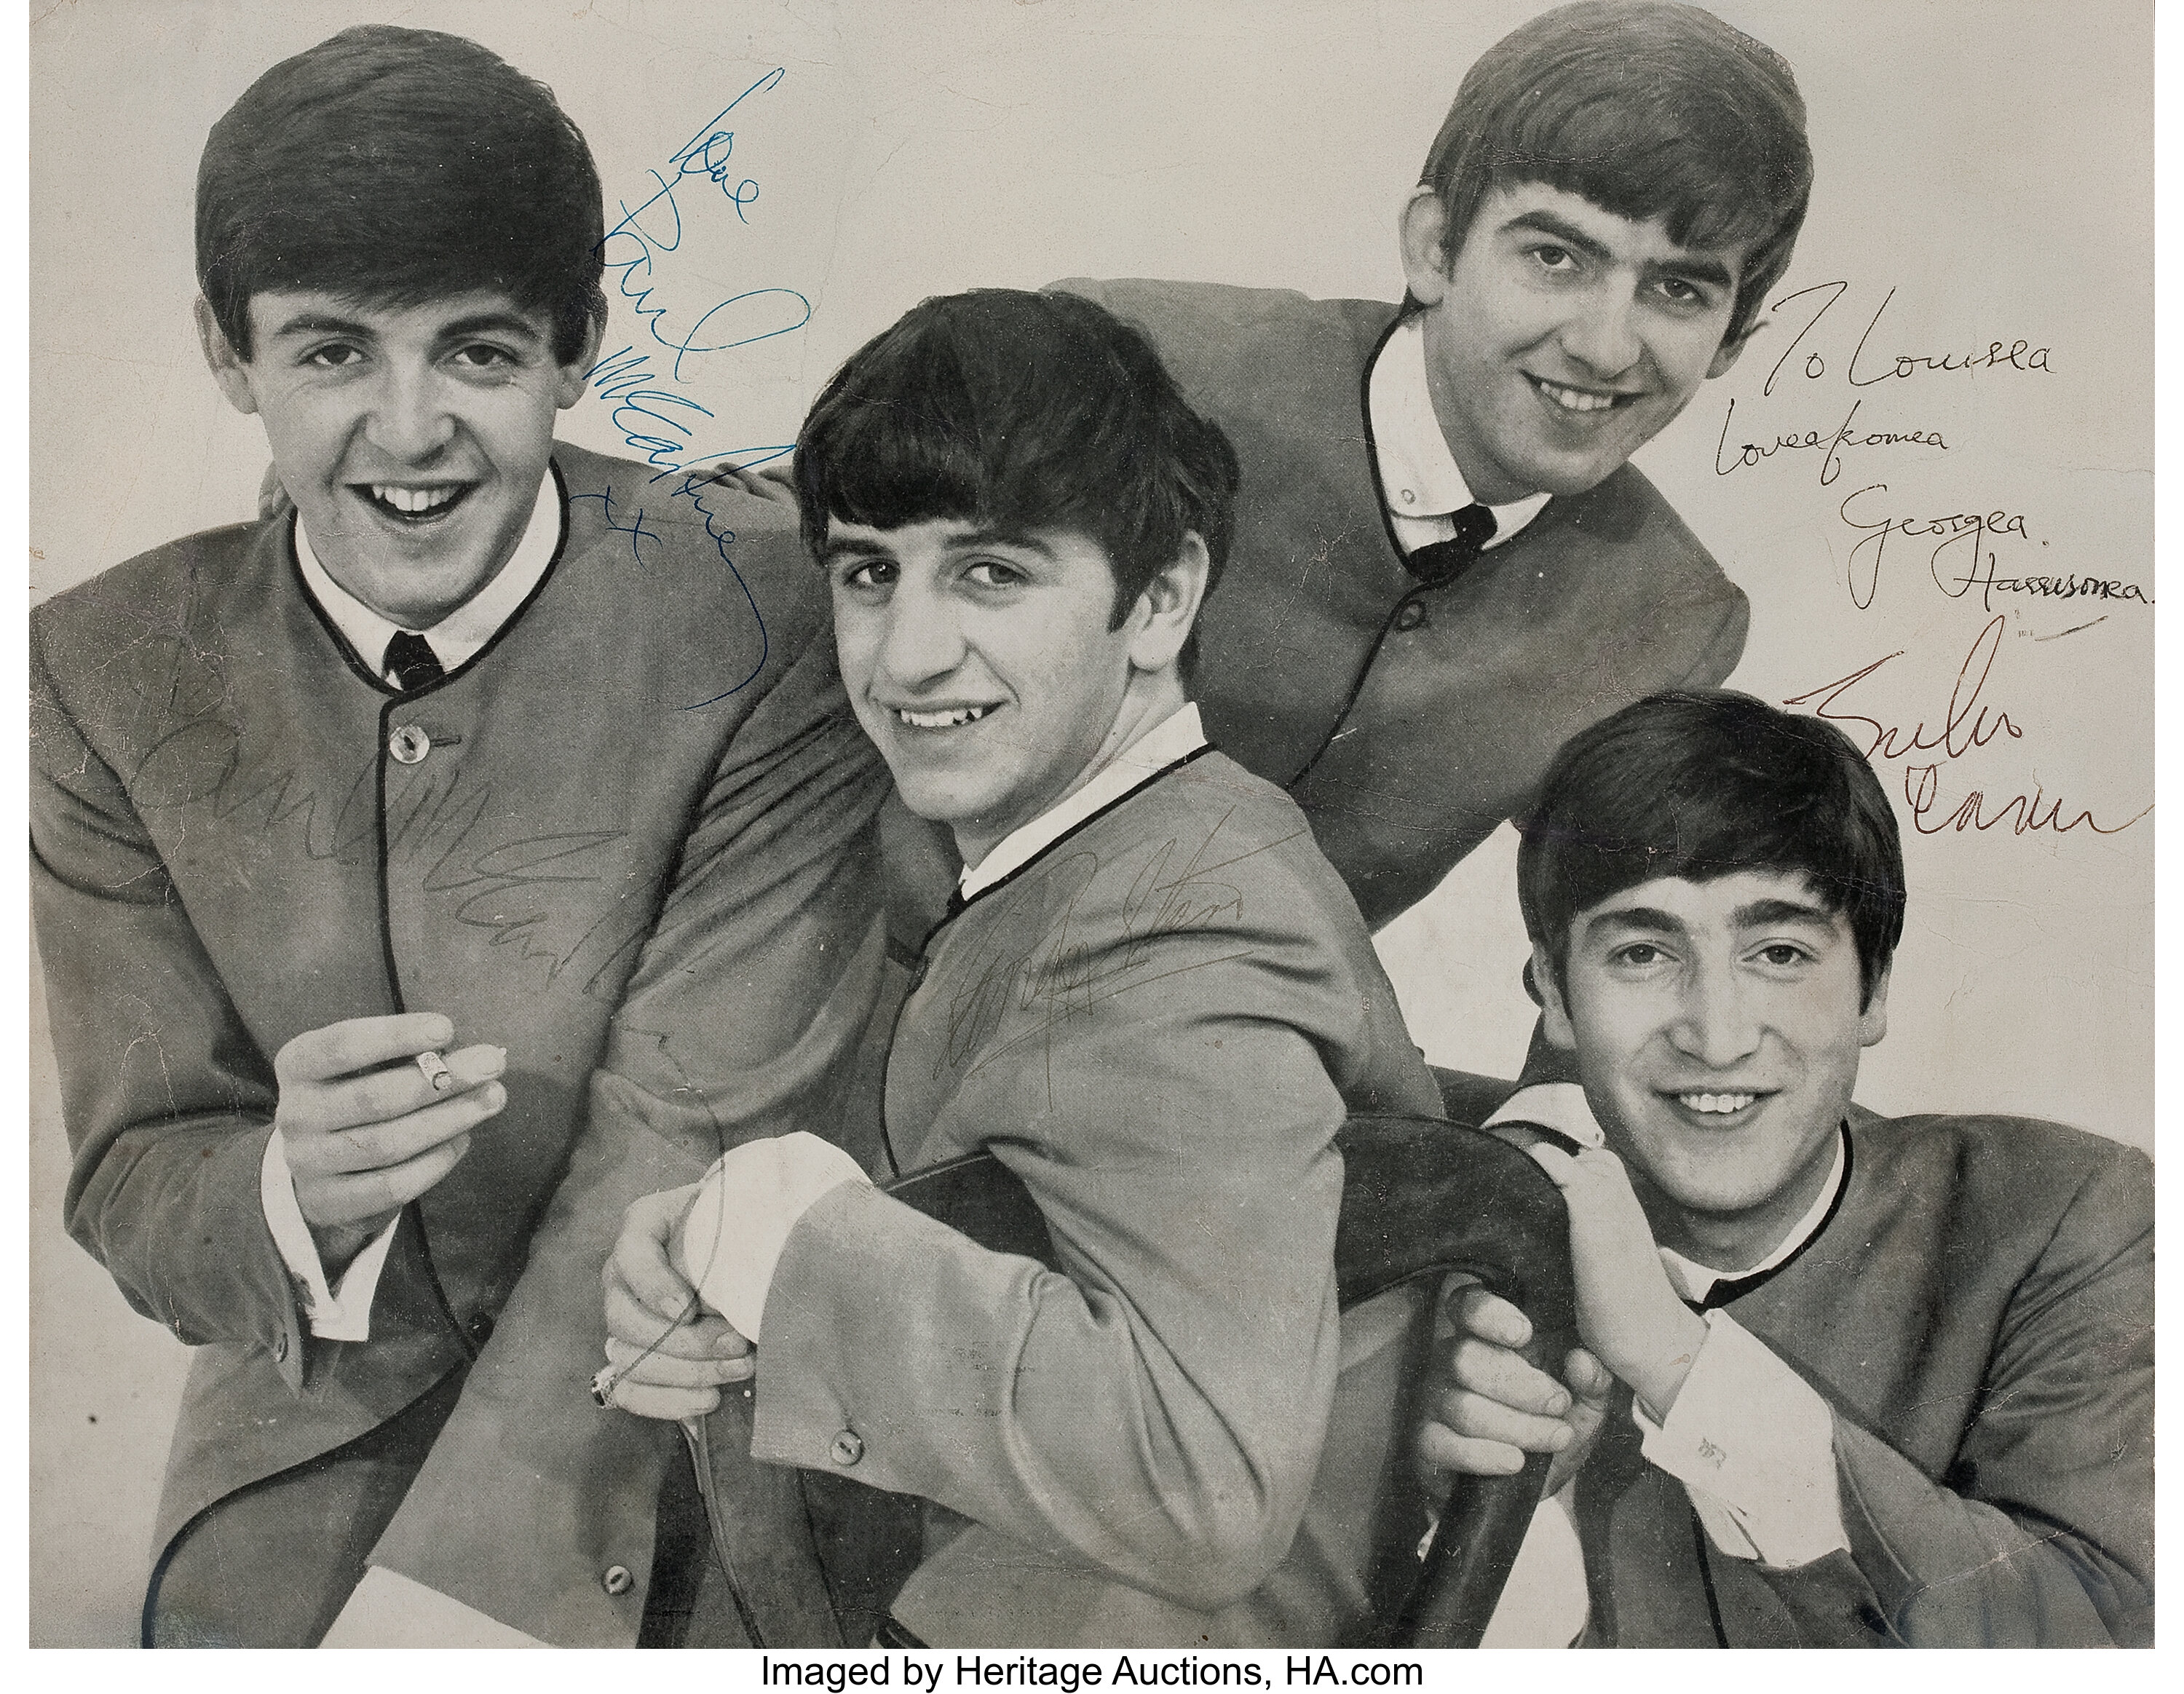 The Beatles Band Signed A Hard Day S Night Promotional Photo Lot Heritage Auctions